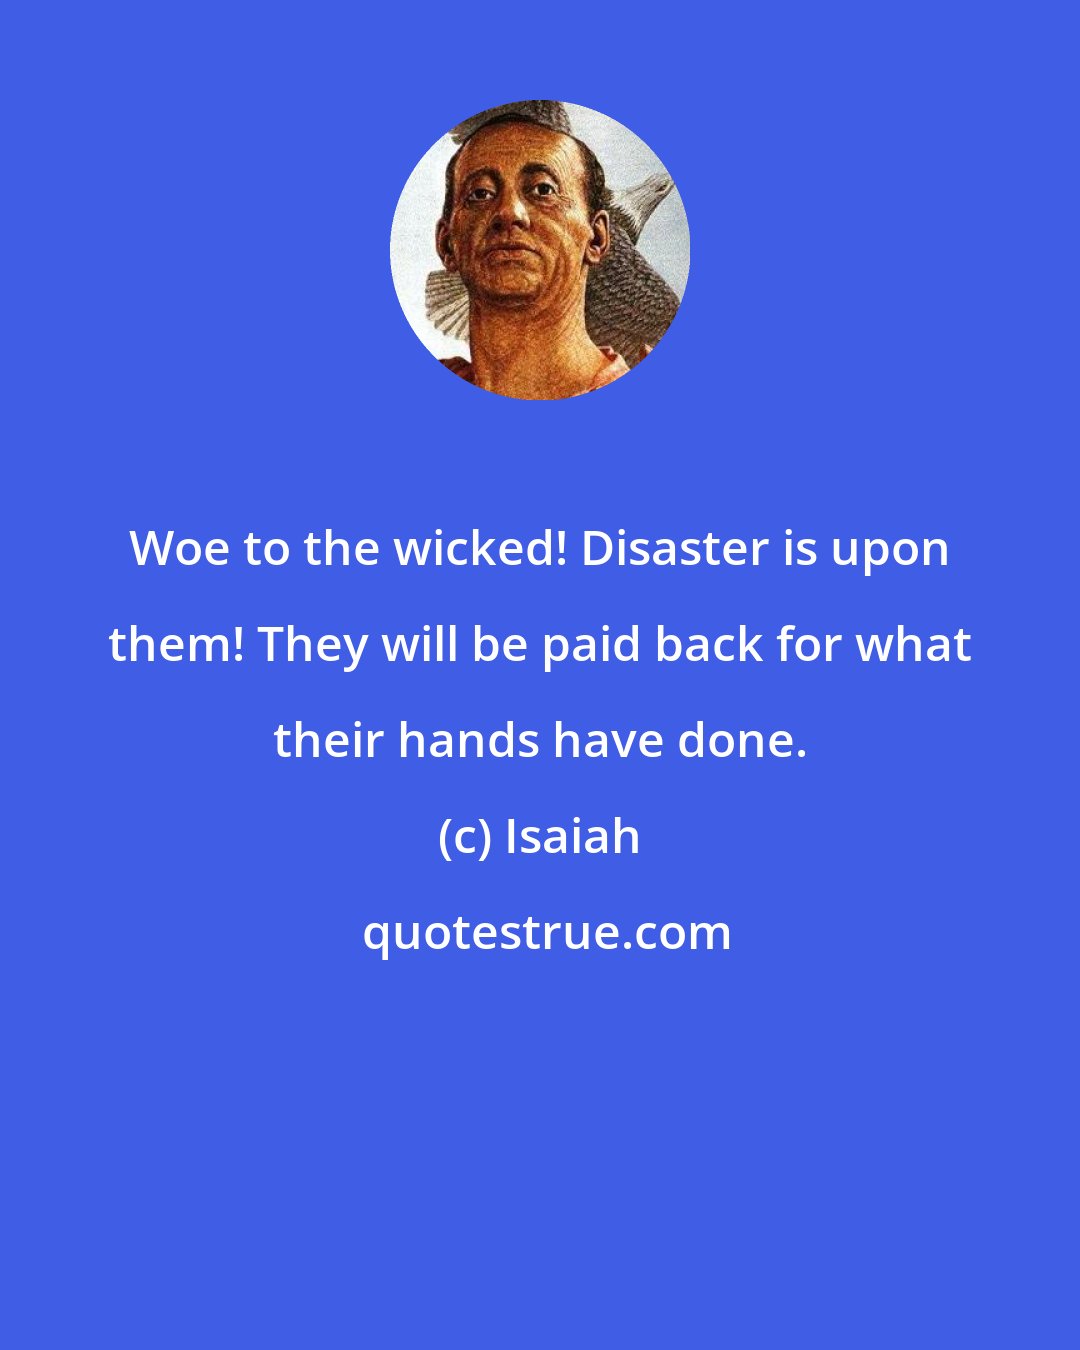 Isaiah: Woe to the wicked! Disaster is upon them! They will be paid back for what their hands have done.